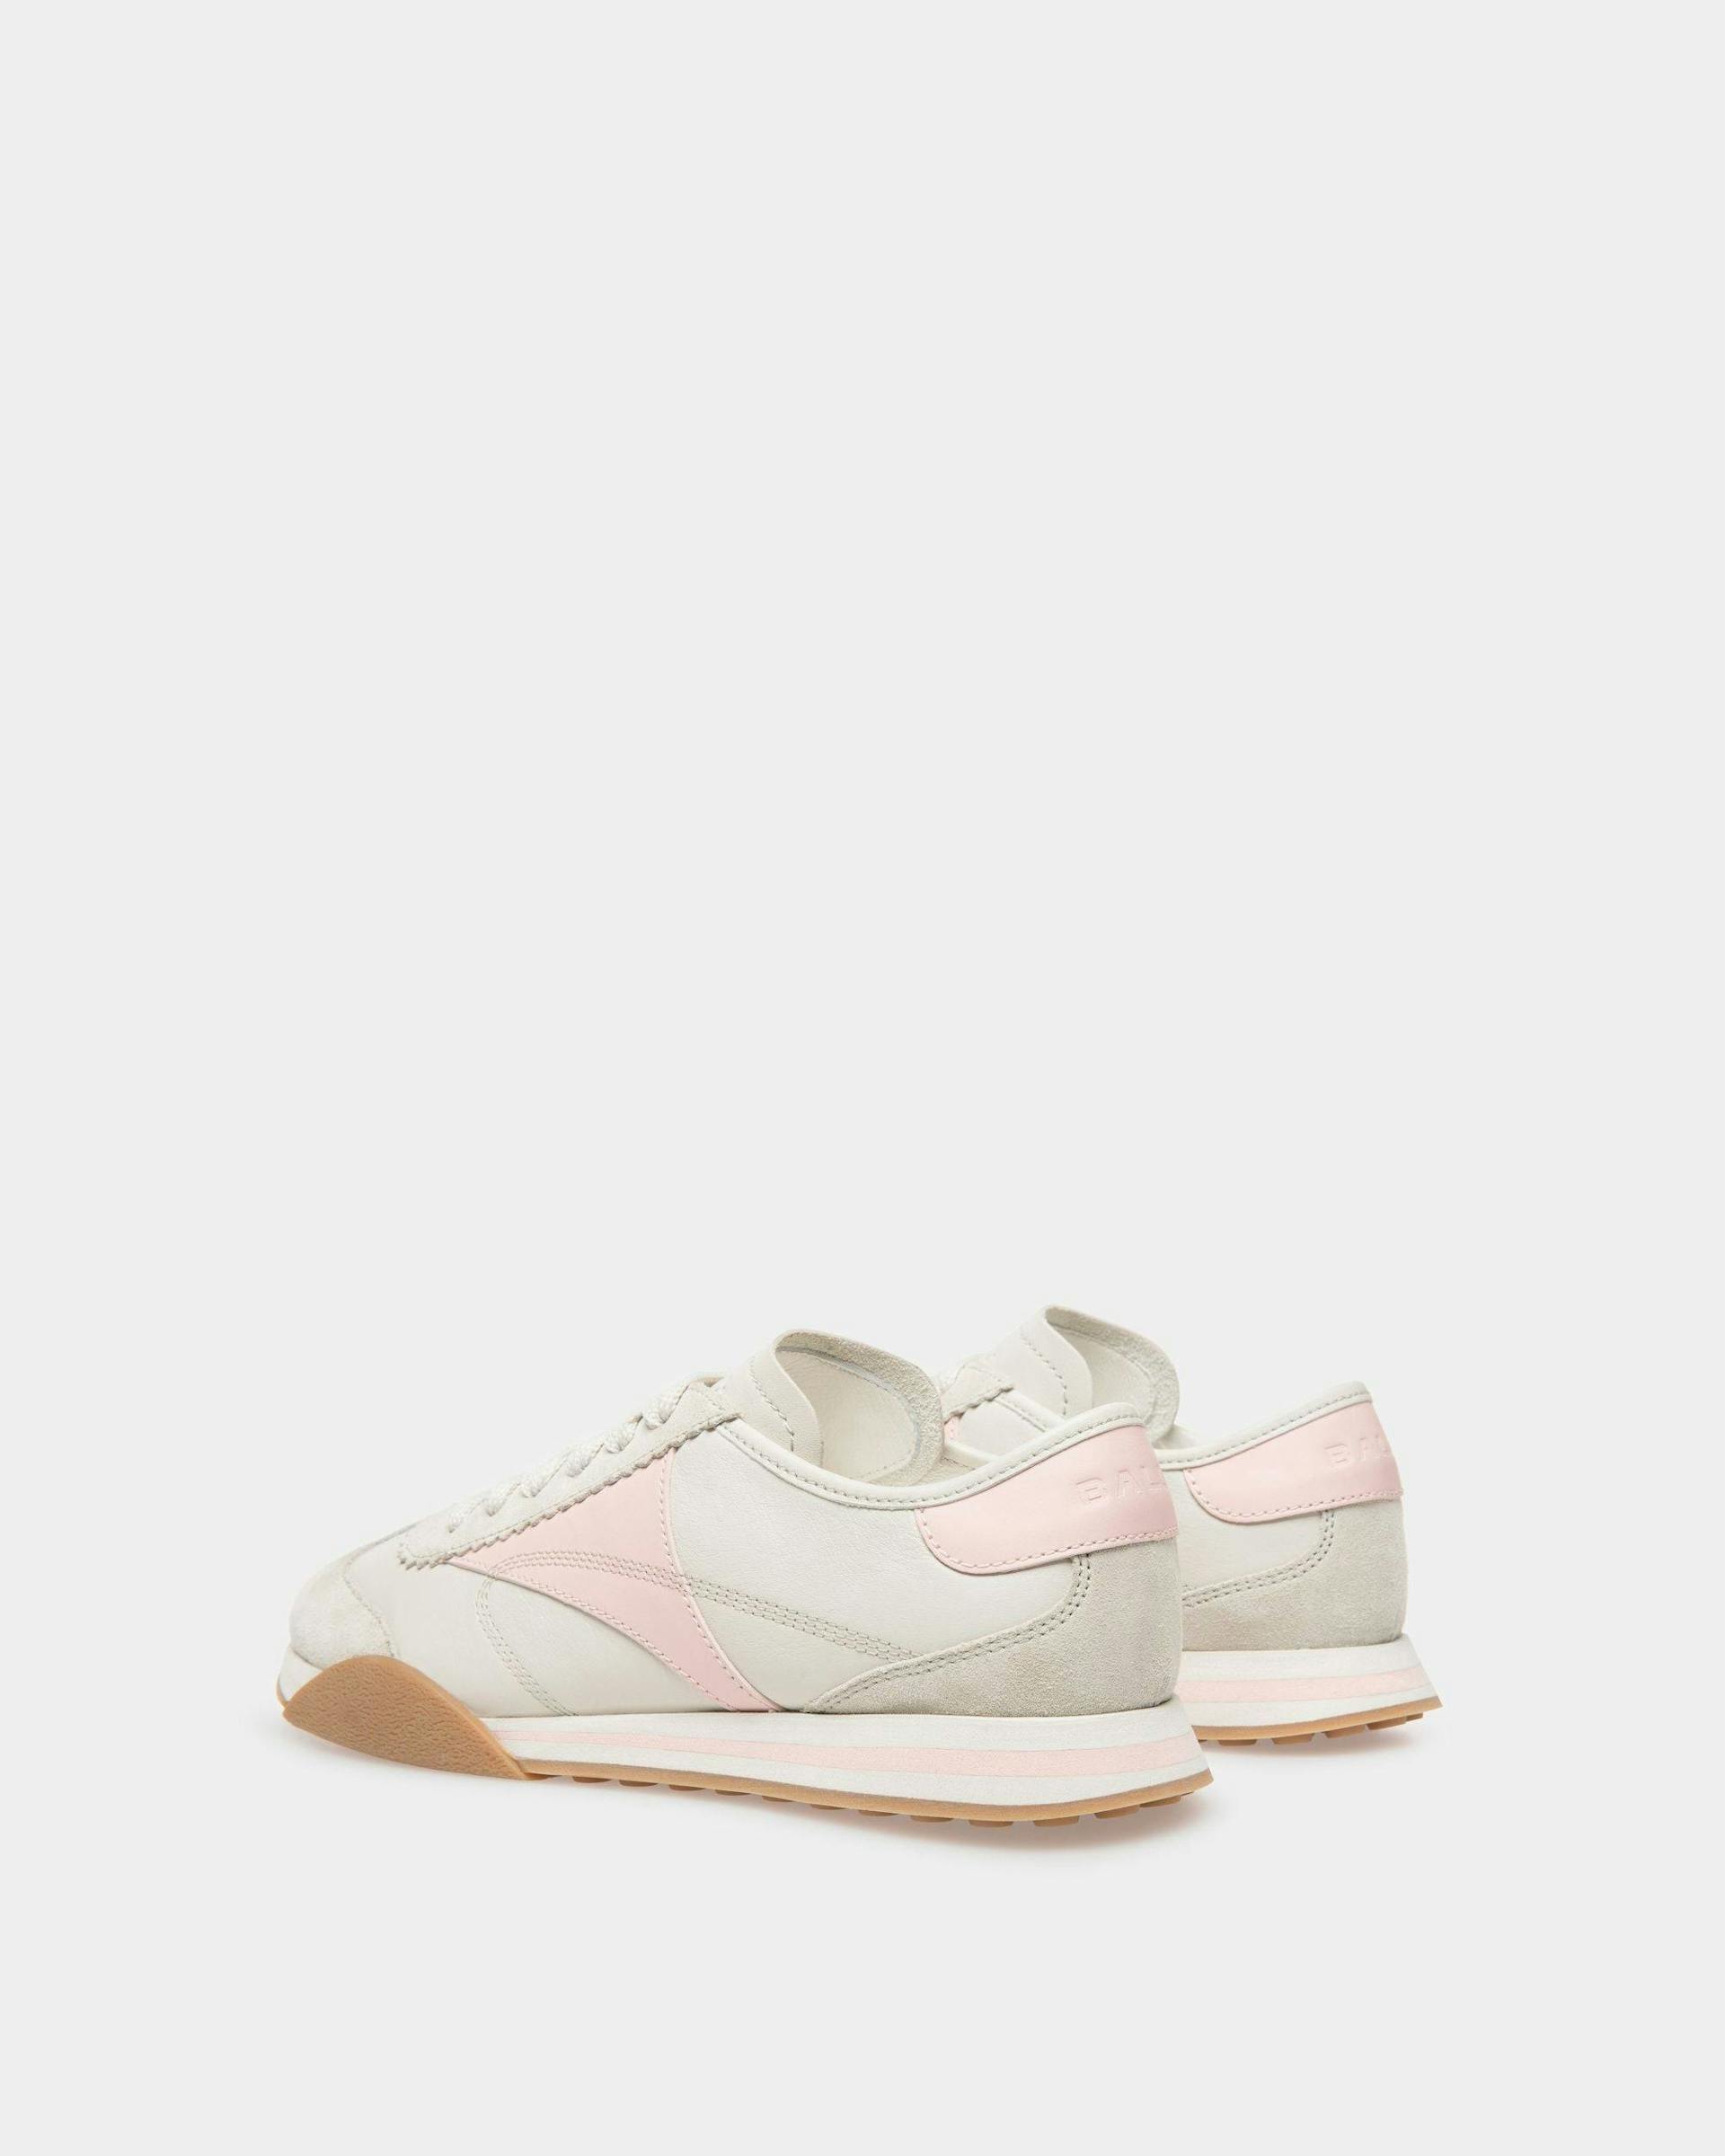 Sussex Sneakers In Dusty White And Rose Leather - Women's - Bally - 03